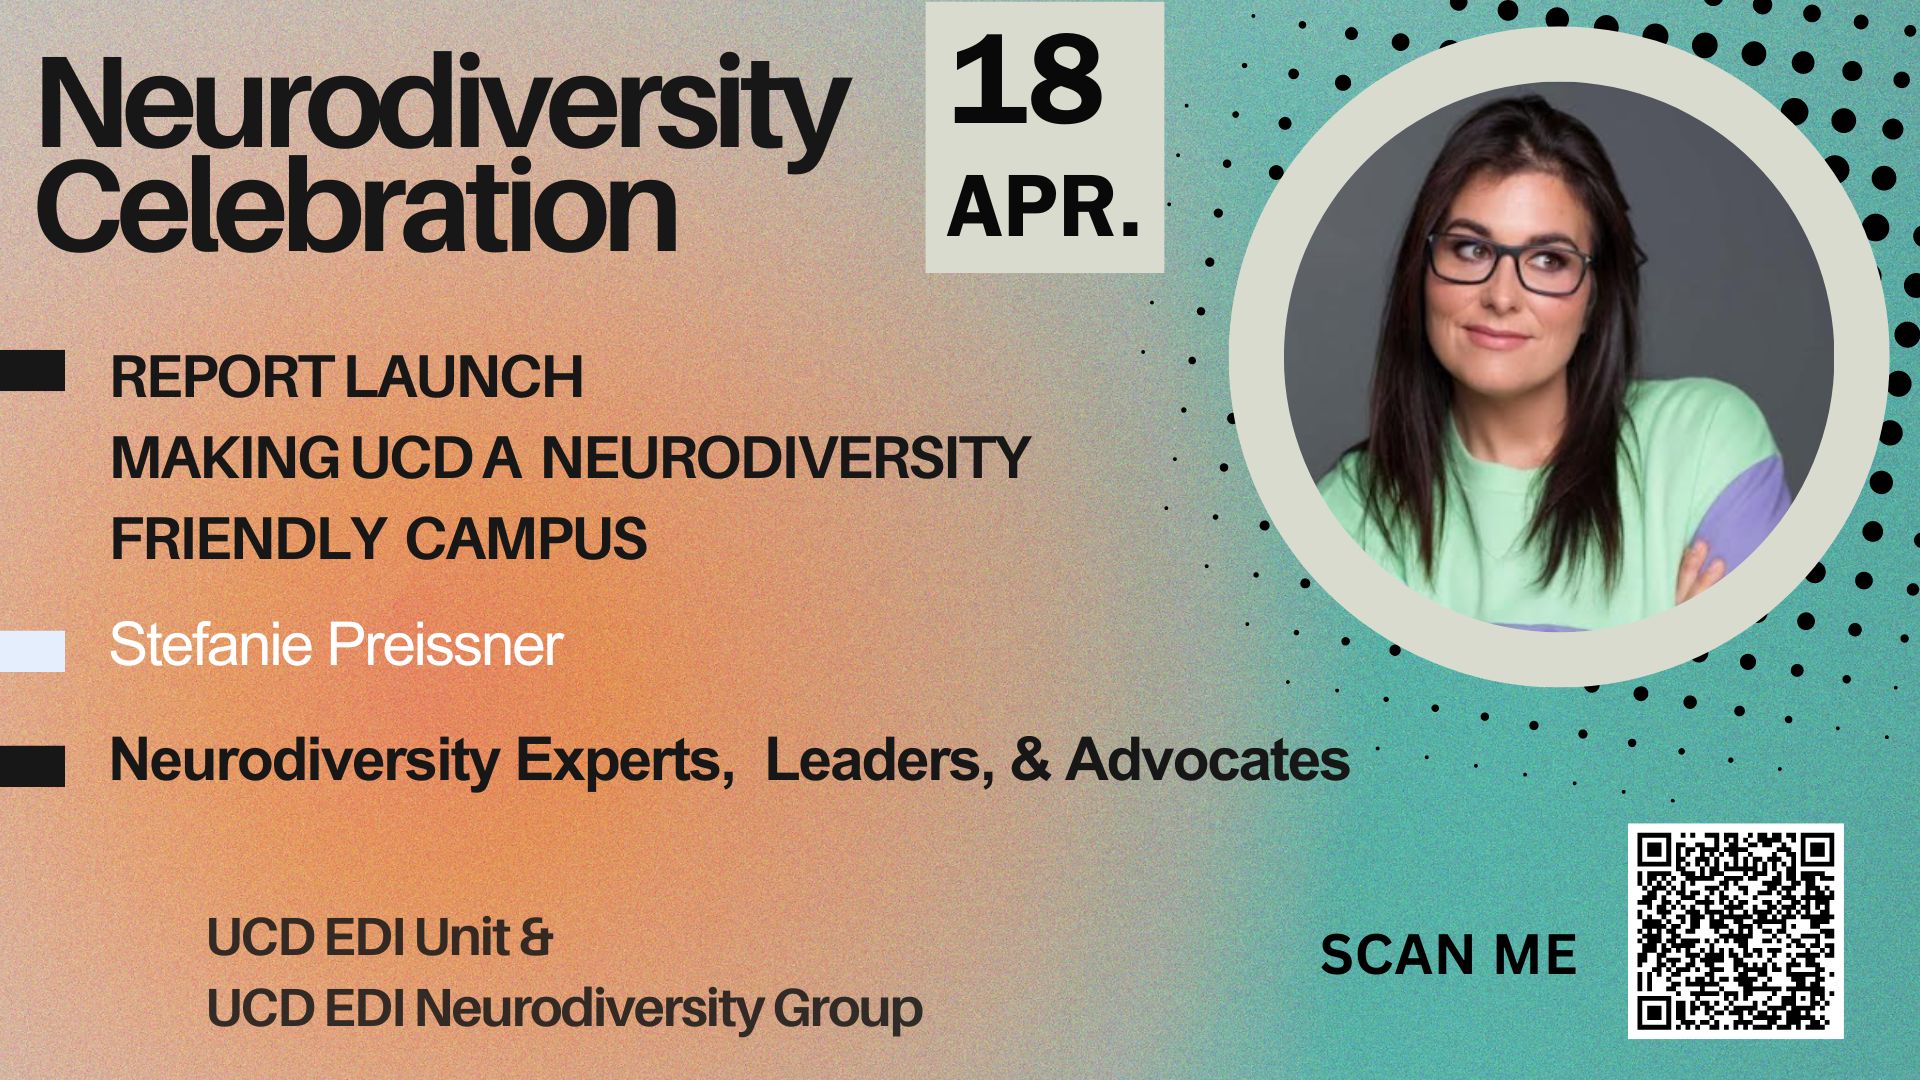 Poster with details on Neurodiversity Celebration event on April 18th 2024, including image of speaker Stefanie Preissner. Report Launch - Making UCD a Neurodiversity Friendly Campus. Neurodiversity Experts, Leaders and Advocates